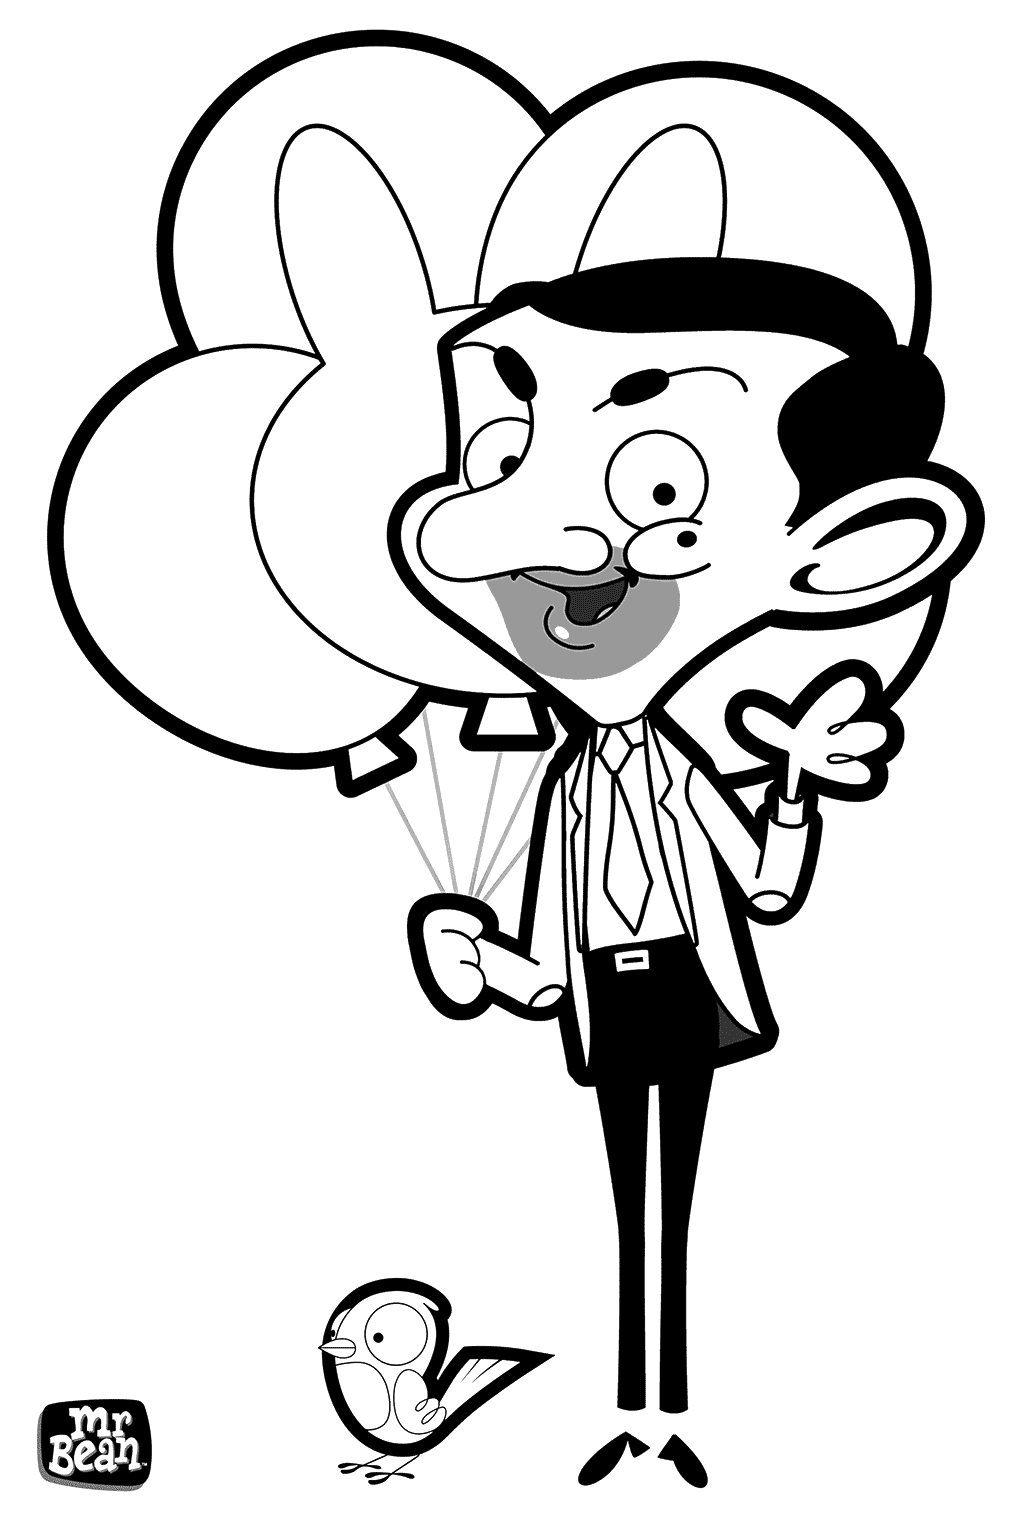 Mr Bean with Balloons Coloring Pages